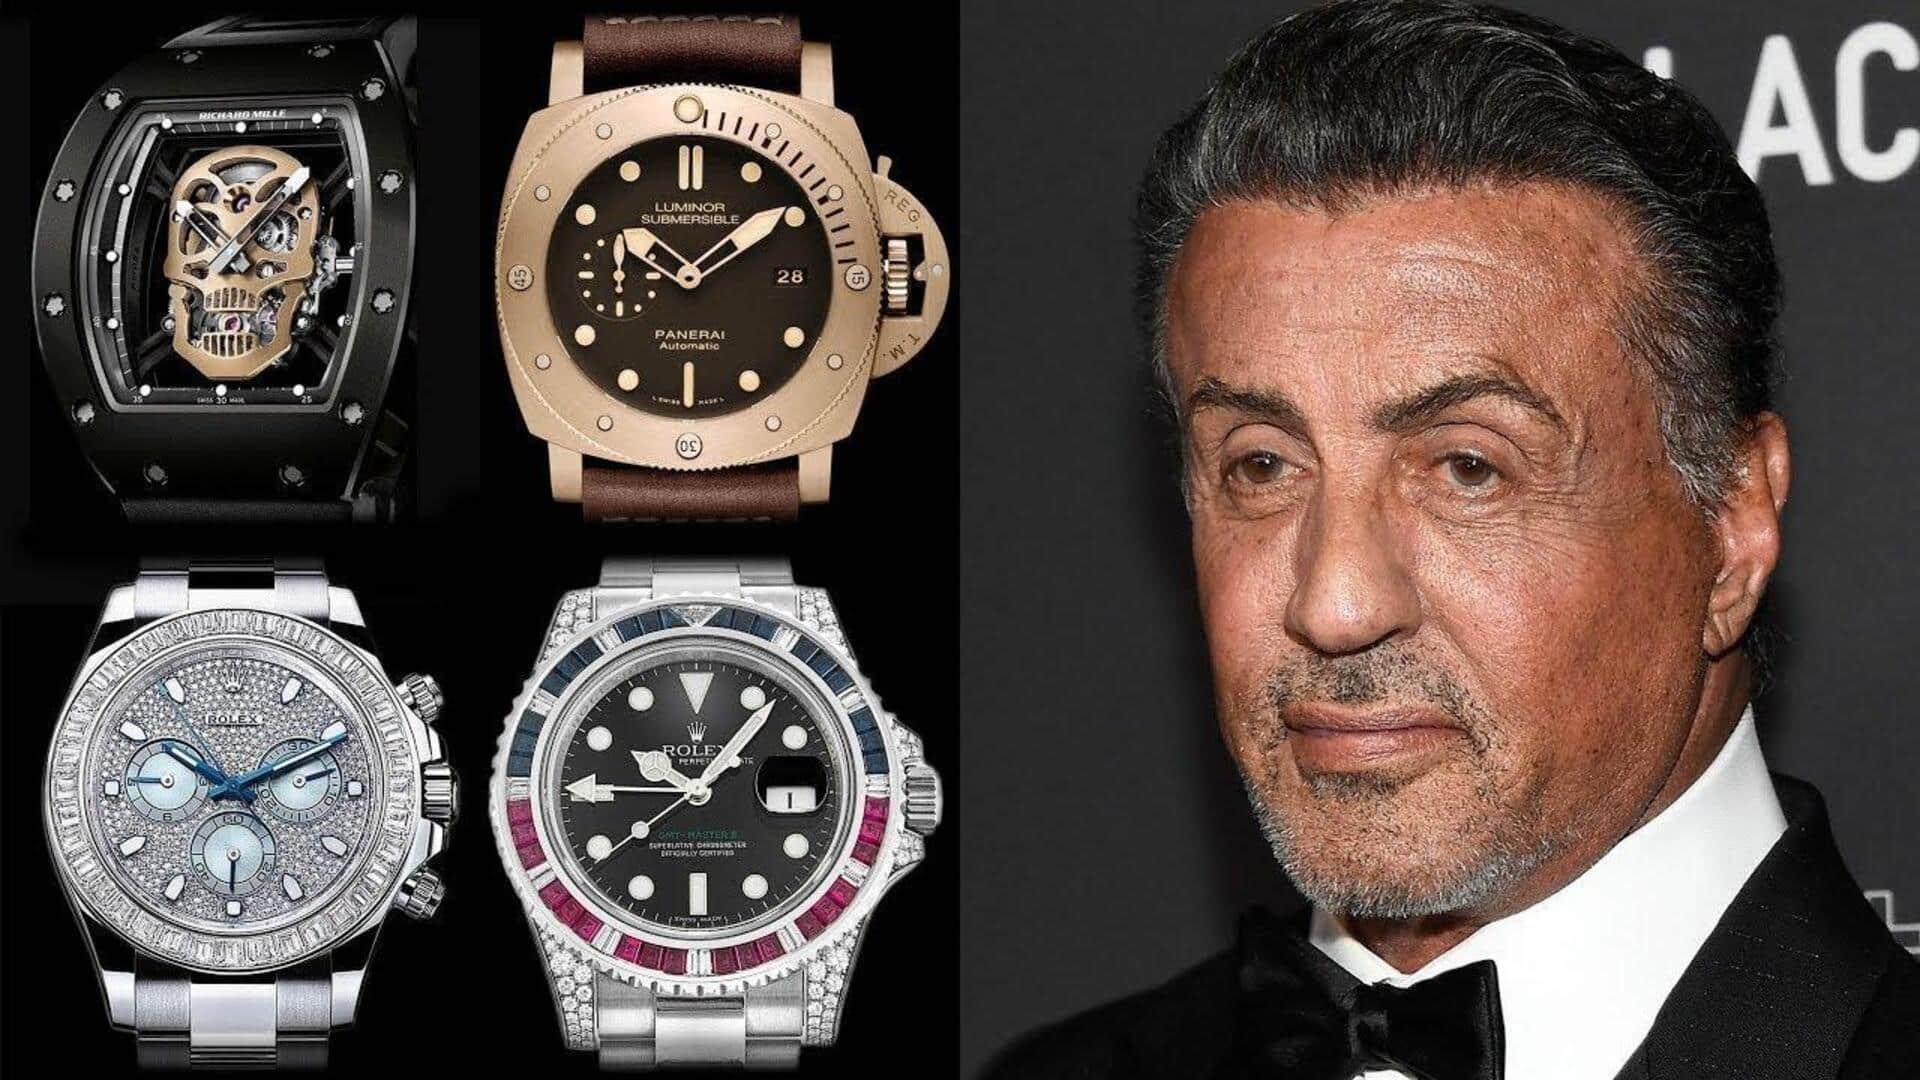 Sylvester Stallone set to auction off $6M worth of watches